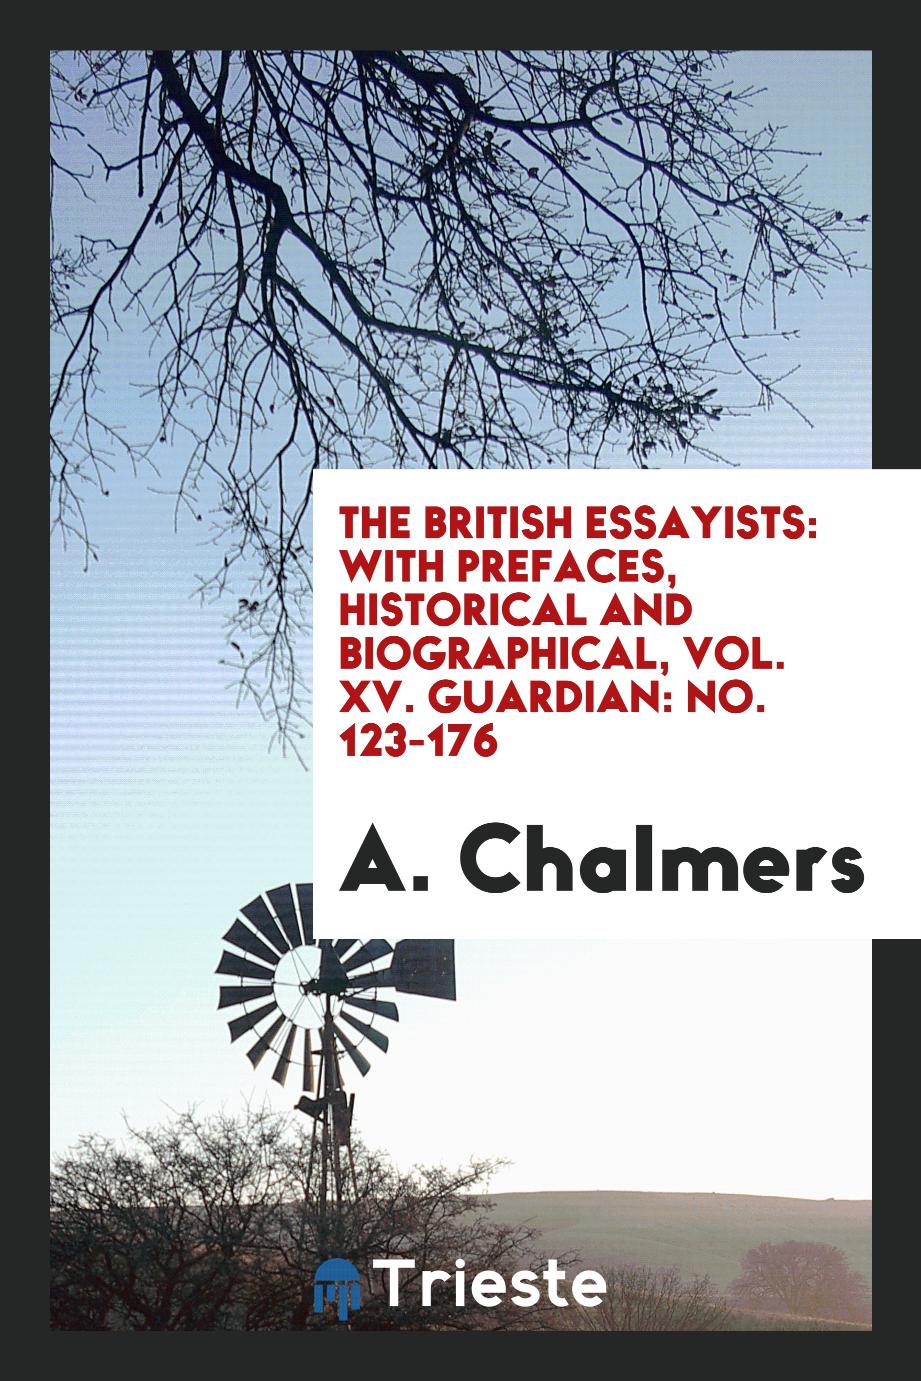 The British essayists: with prefaces, historical and biographical, Vol. XV. Guardian: No. 123-176